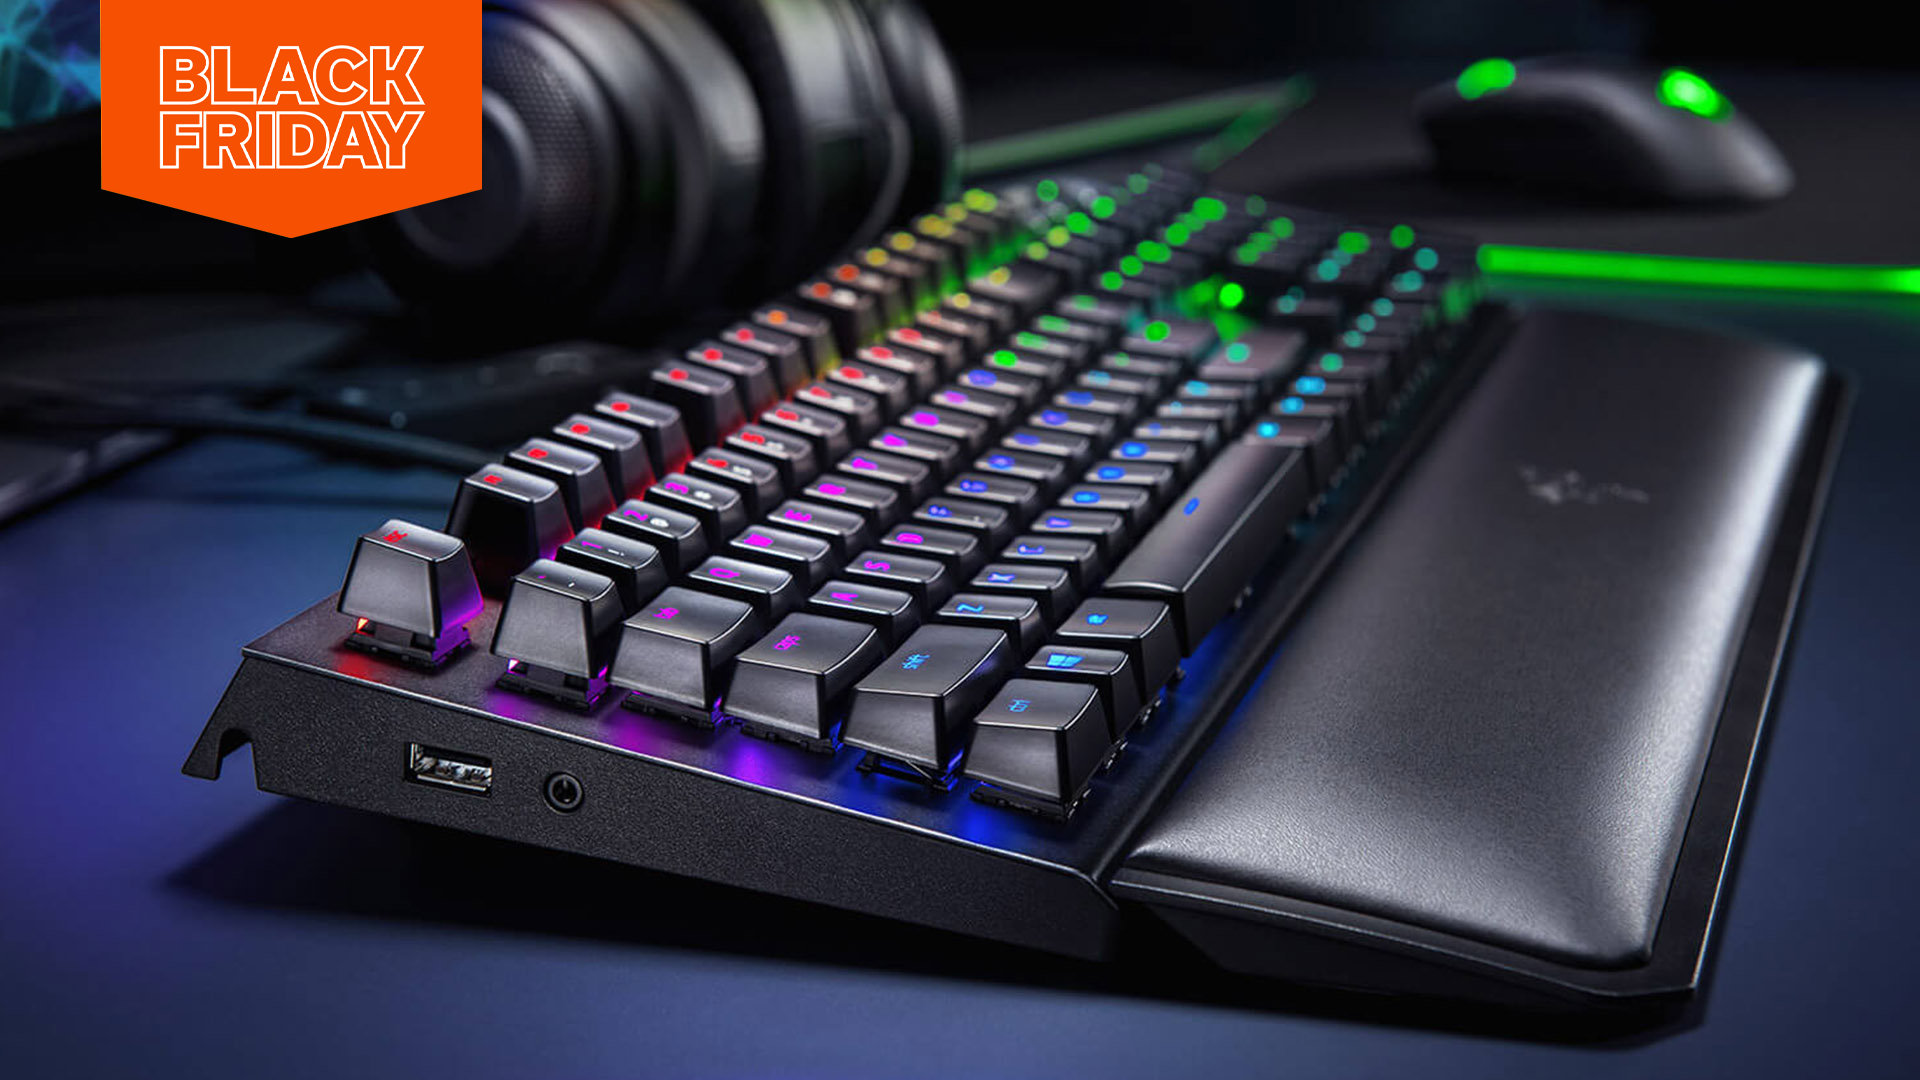 Best Cyber Monday gaming keyboard deals